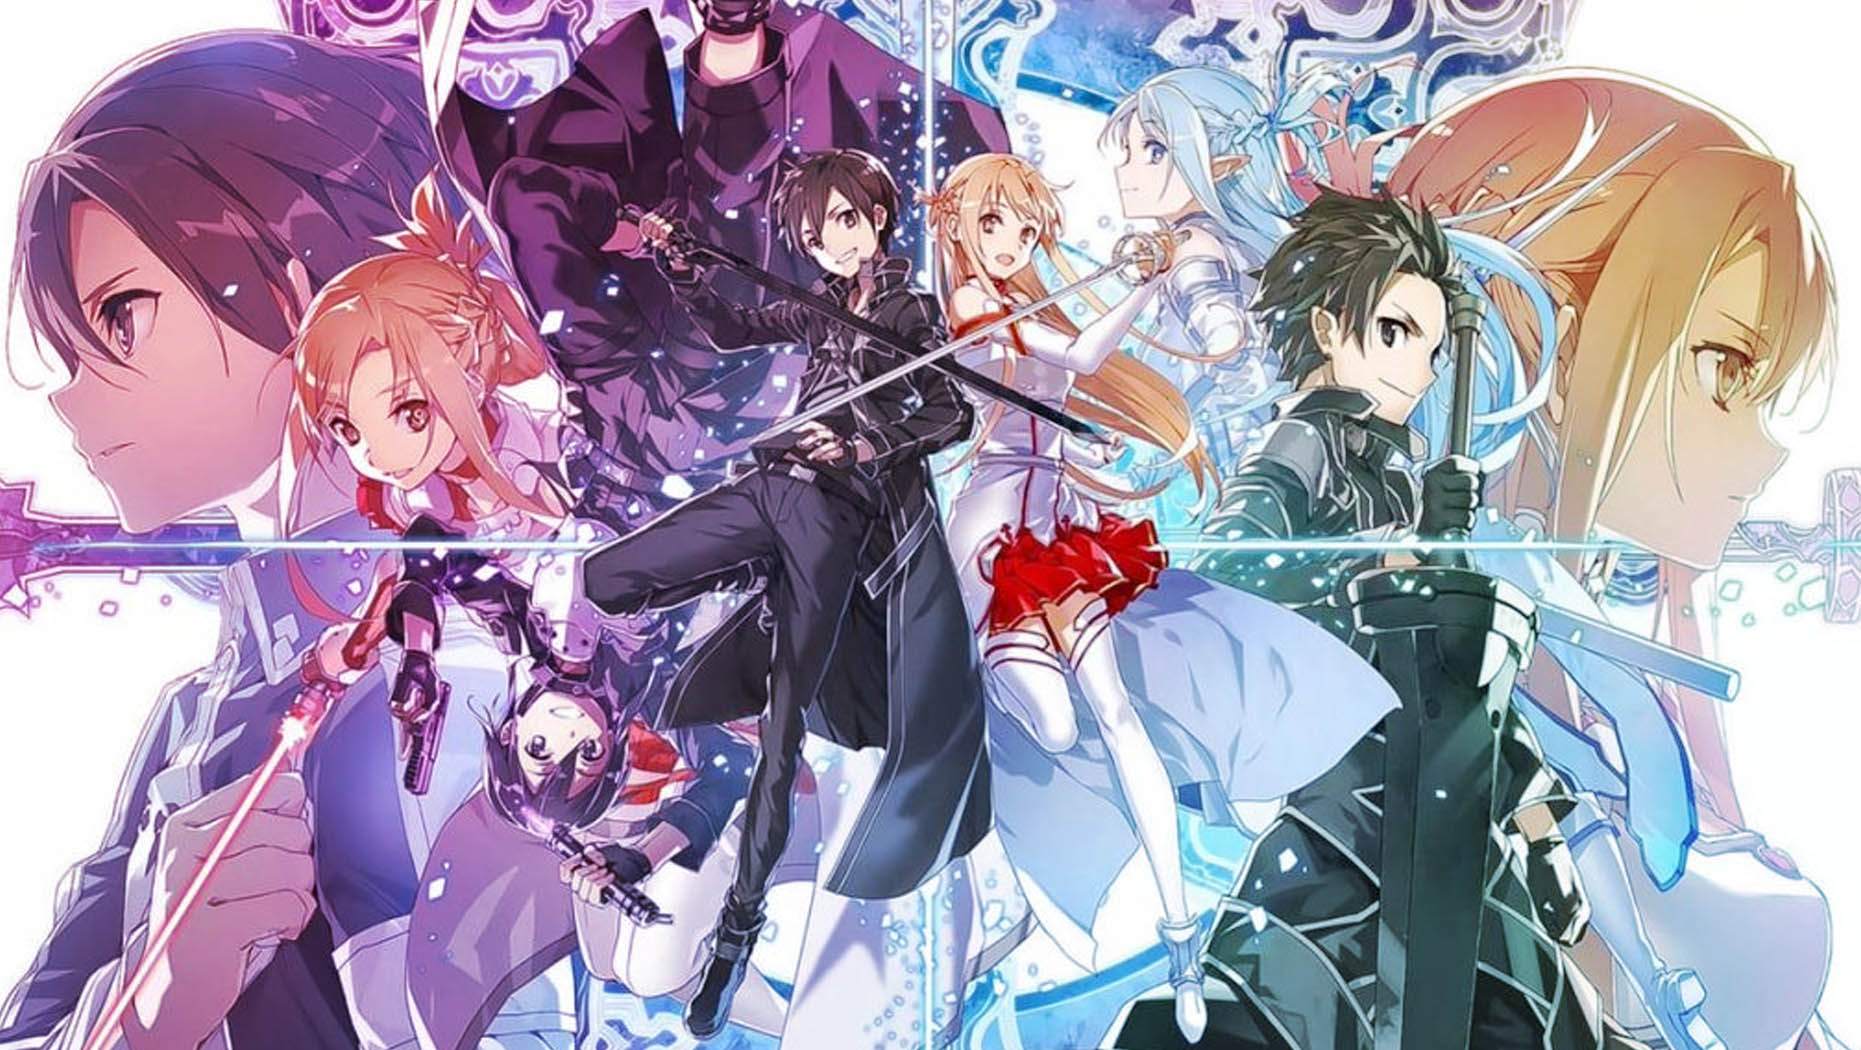 Sword Art Online Season 4 - Expected Release Date and Plot - Daily Research  Plot